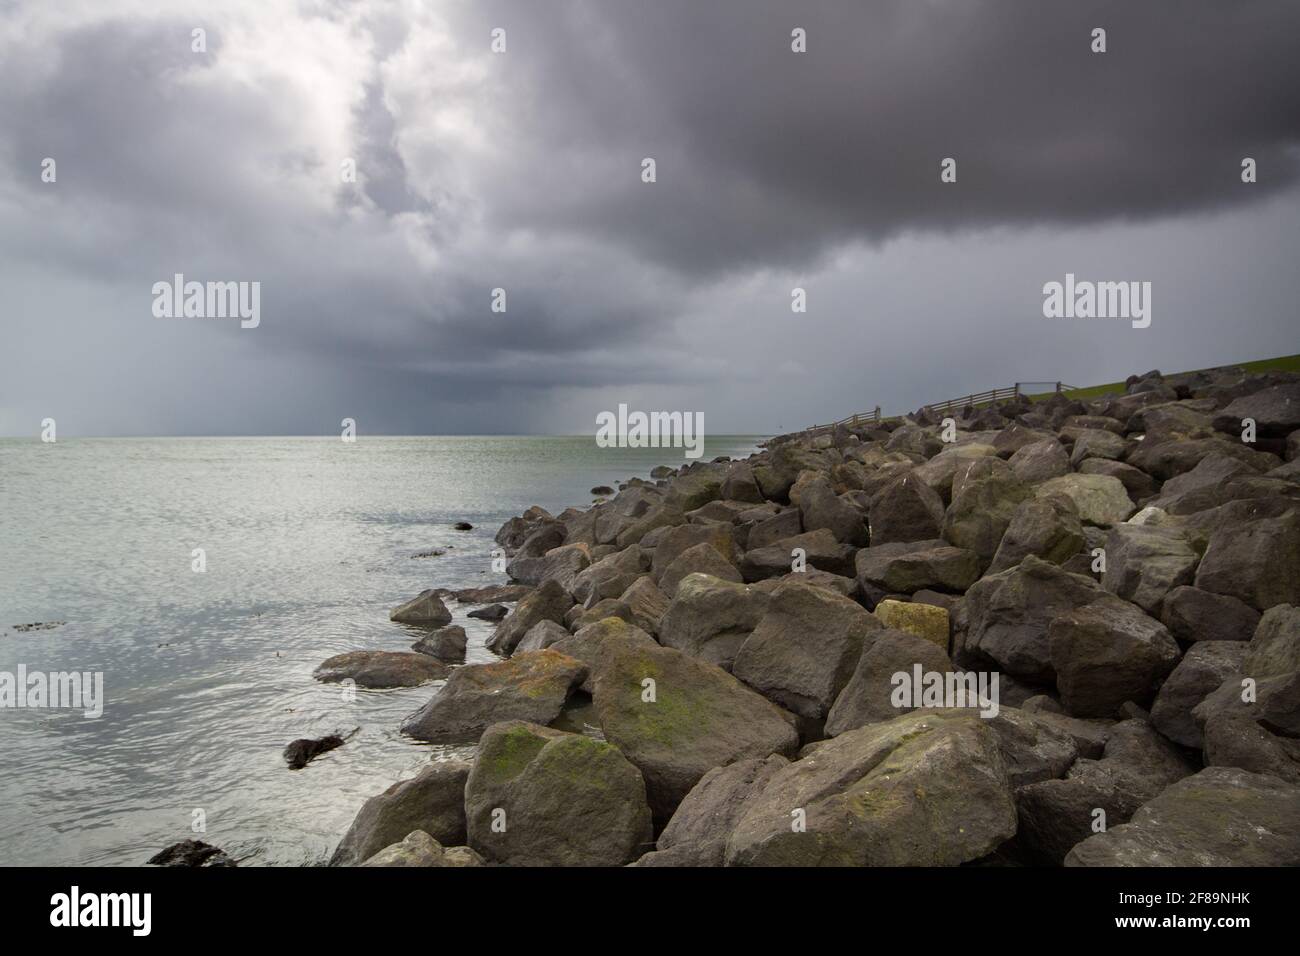 Toe protection of a solid sea dike, made of heavy boulders, under dark, threatening sky Stock Photo